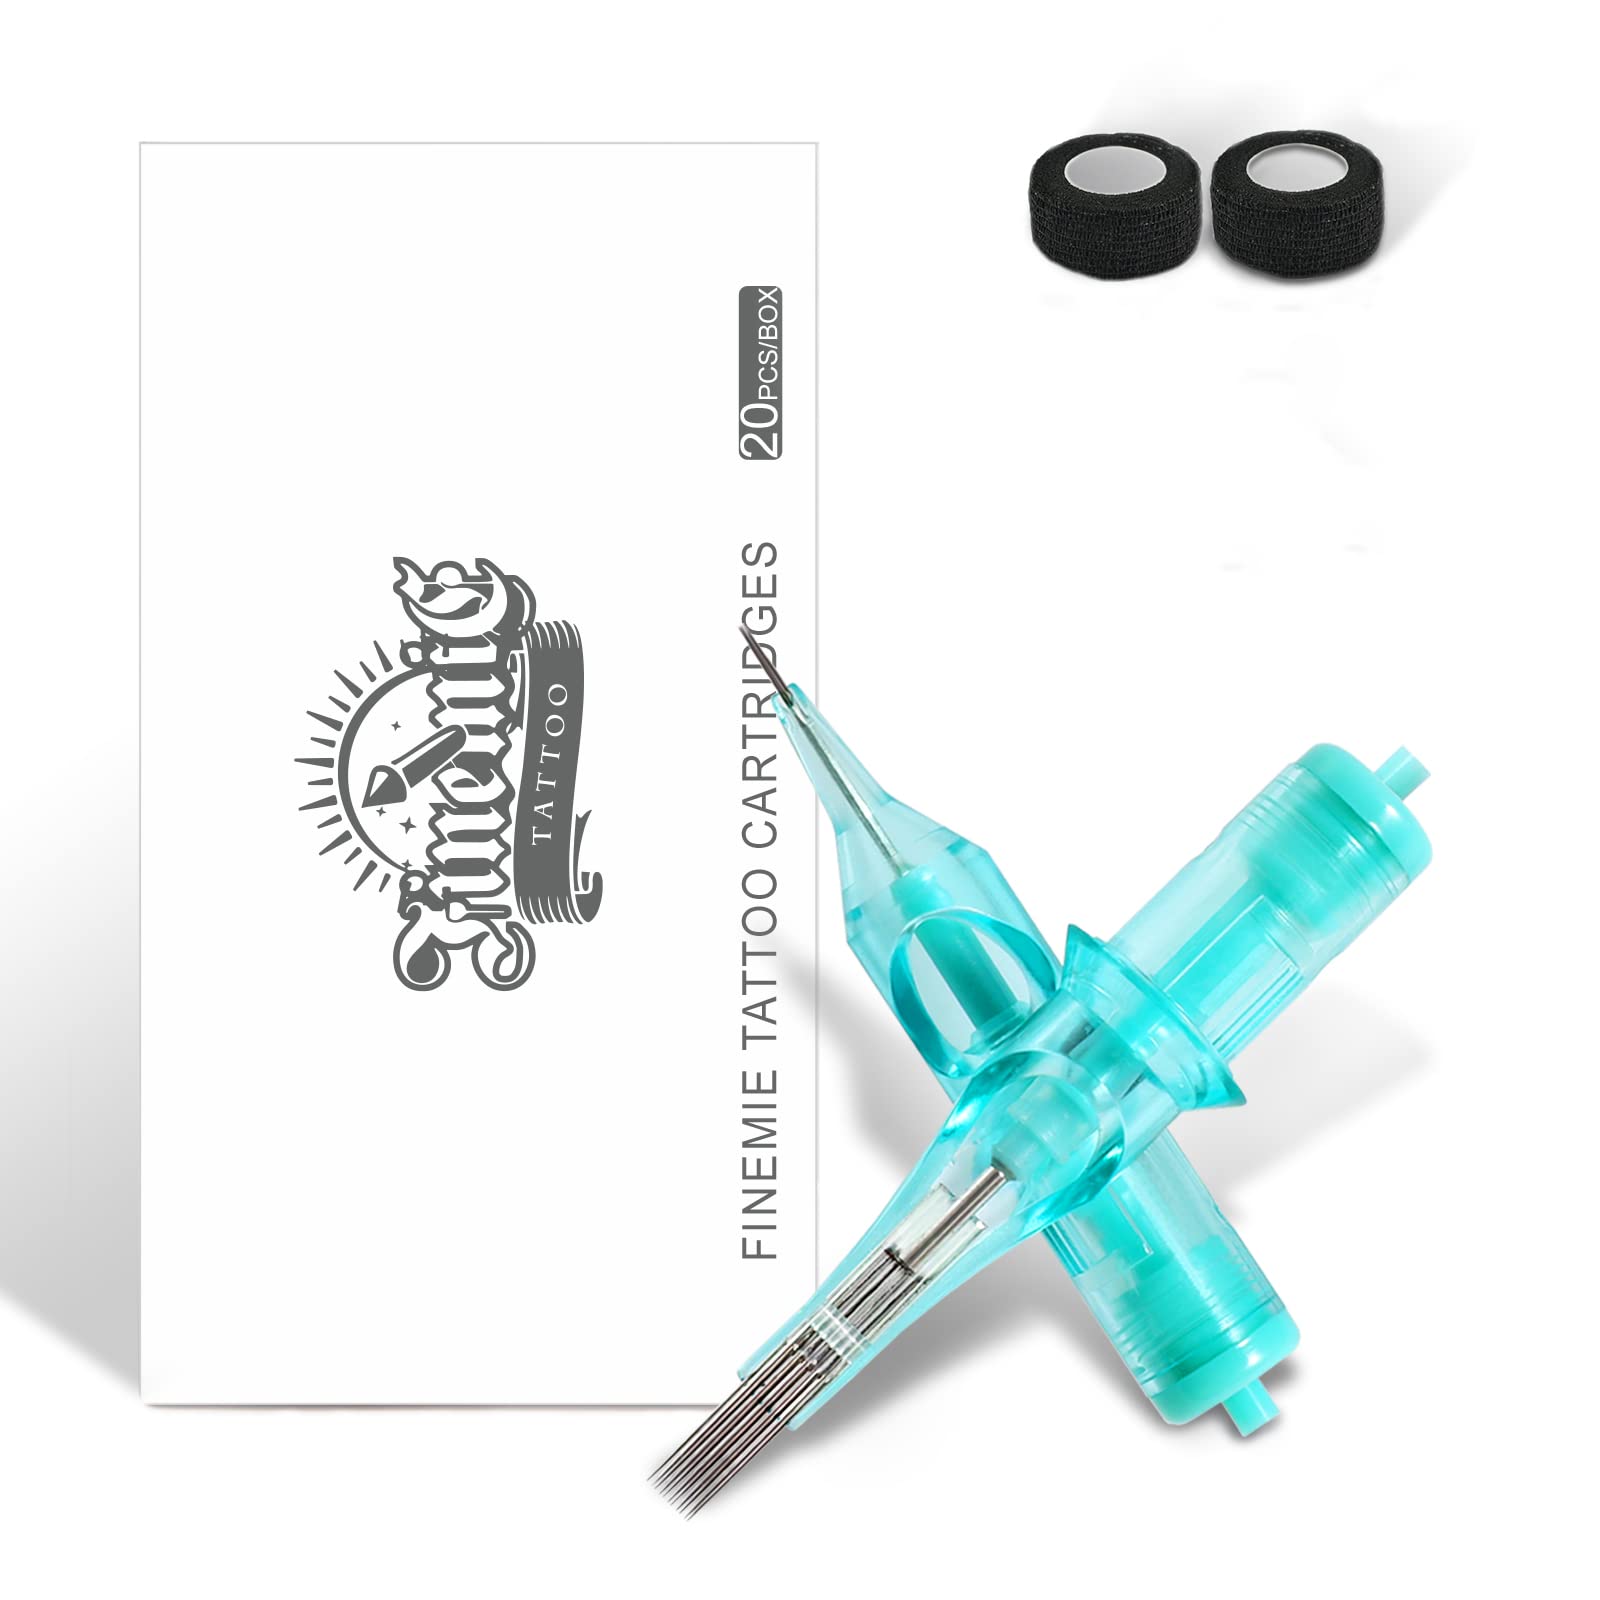 Ambition TREX Cartridges #12 Standard 11RL Disposable Tattoo Needles 11  Round Liner Long Taper 1211RL 20Pcs for Rotary Tattoo Machine Supply